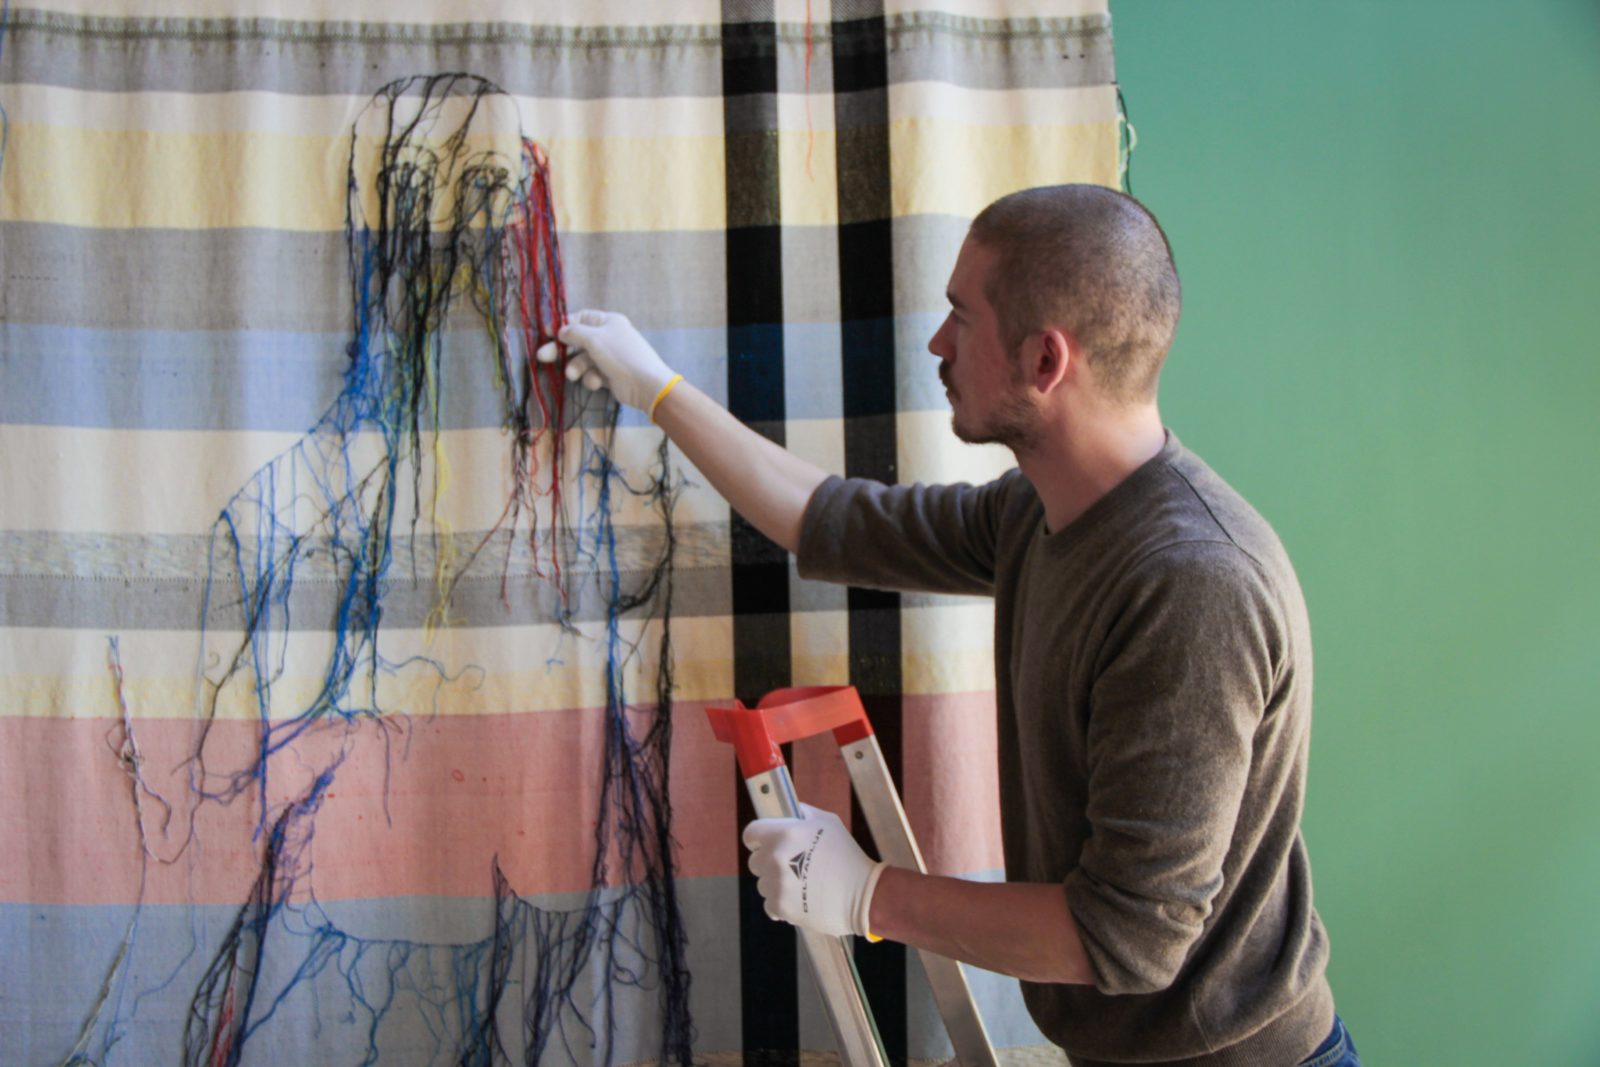 The technician of Institut finlandais Quentin L’hôte installing a tapestry by Sonja Jokiniemi.